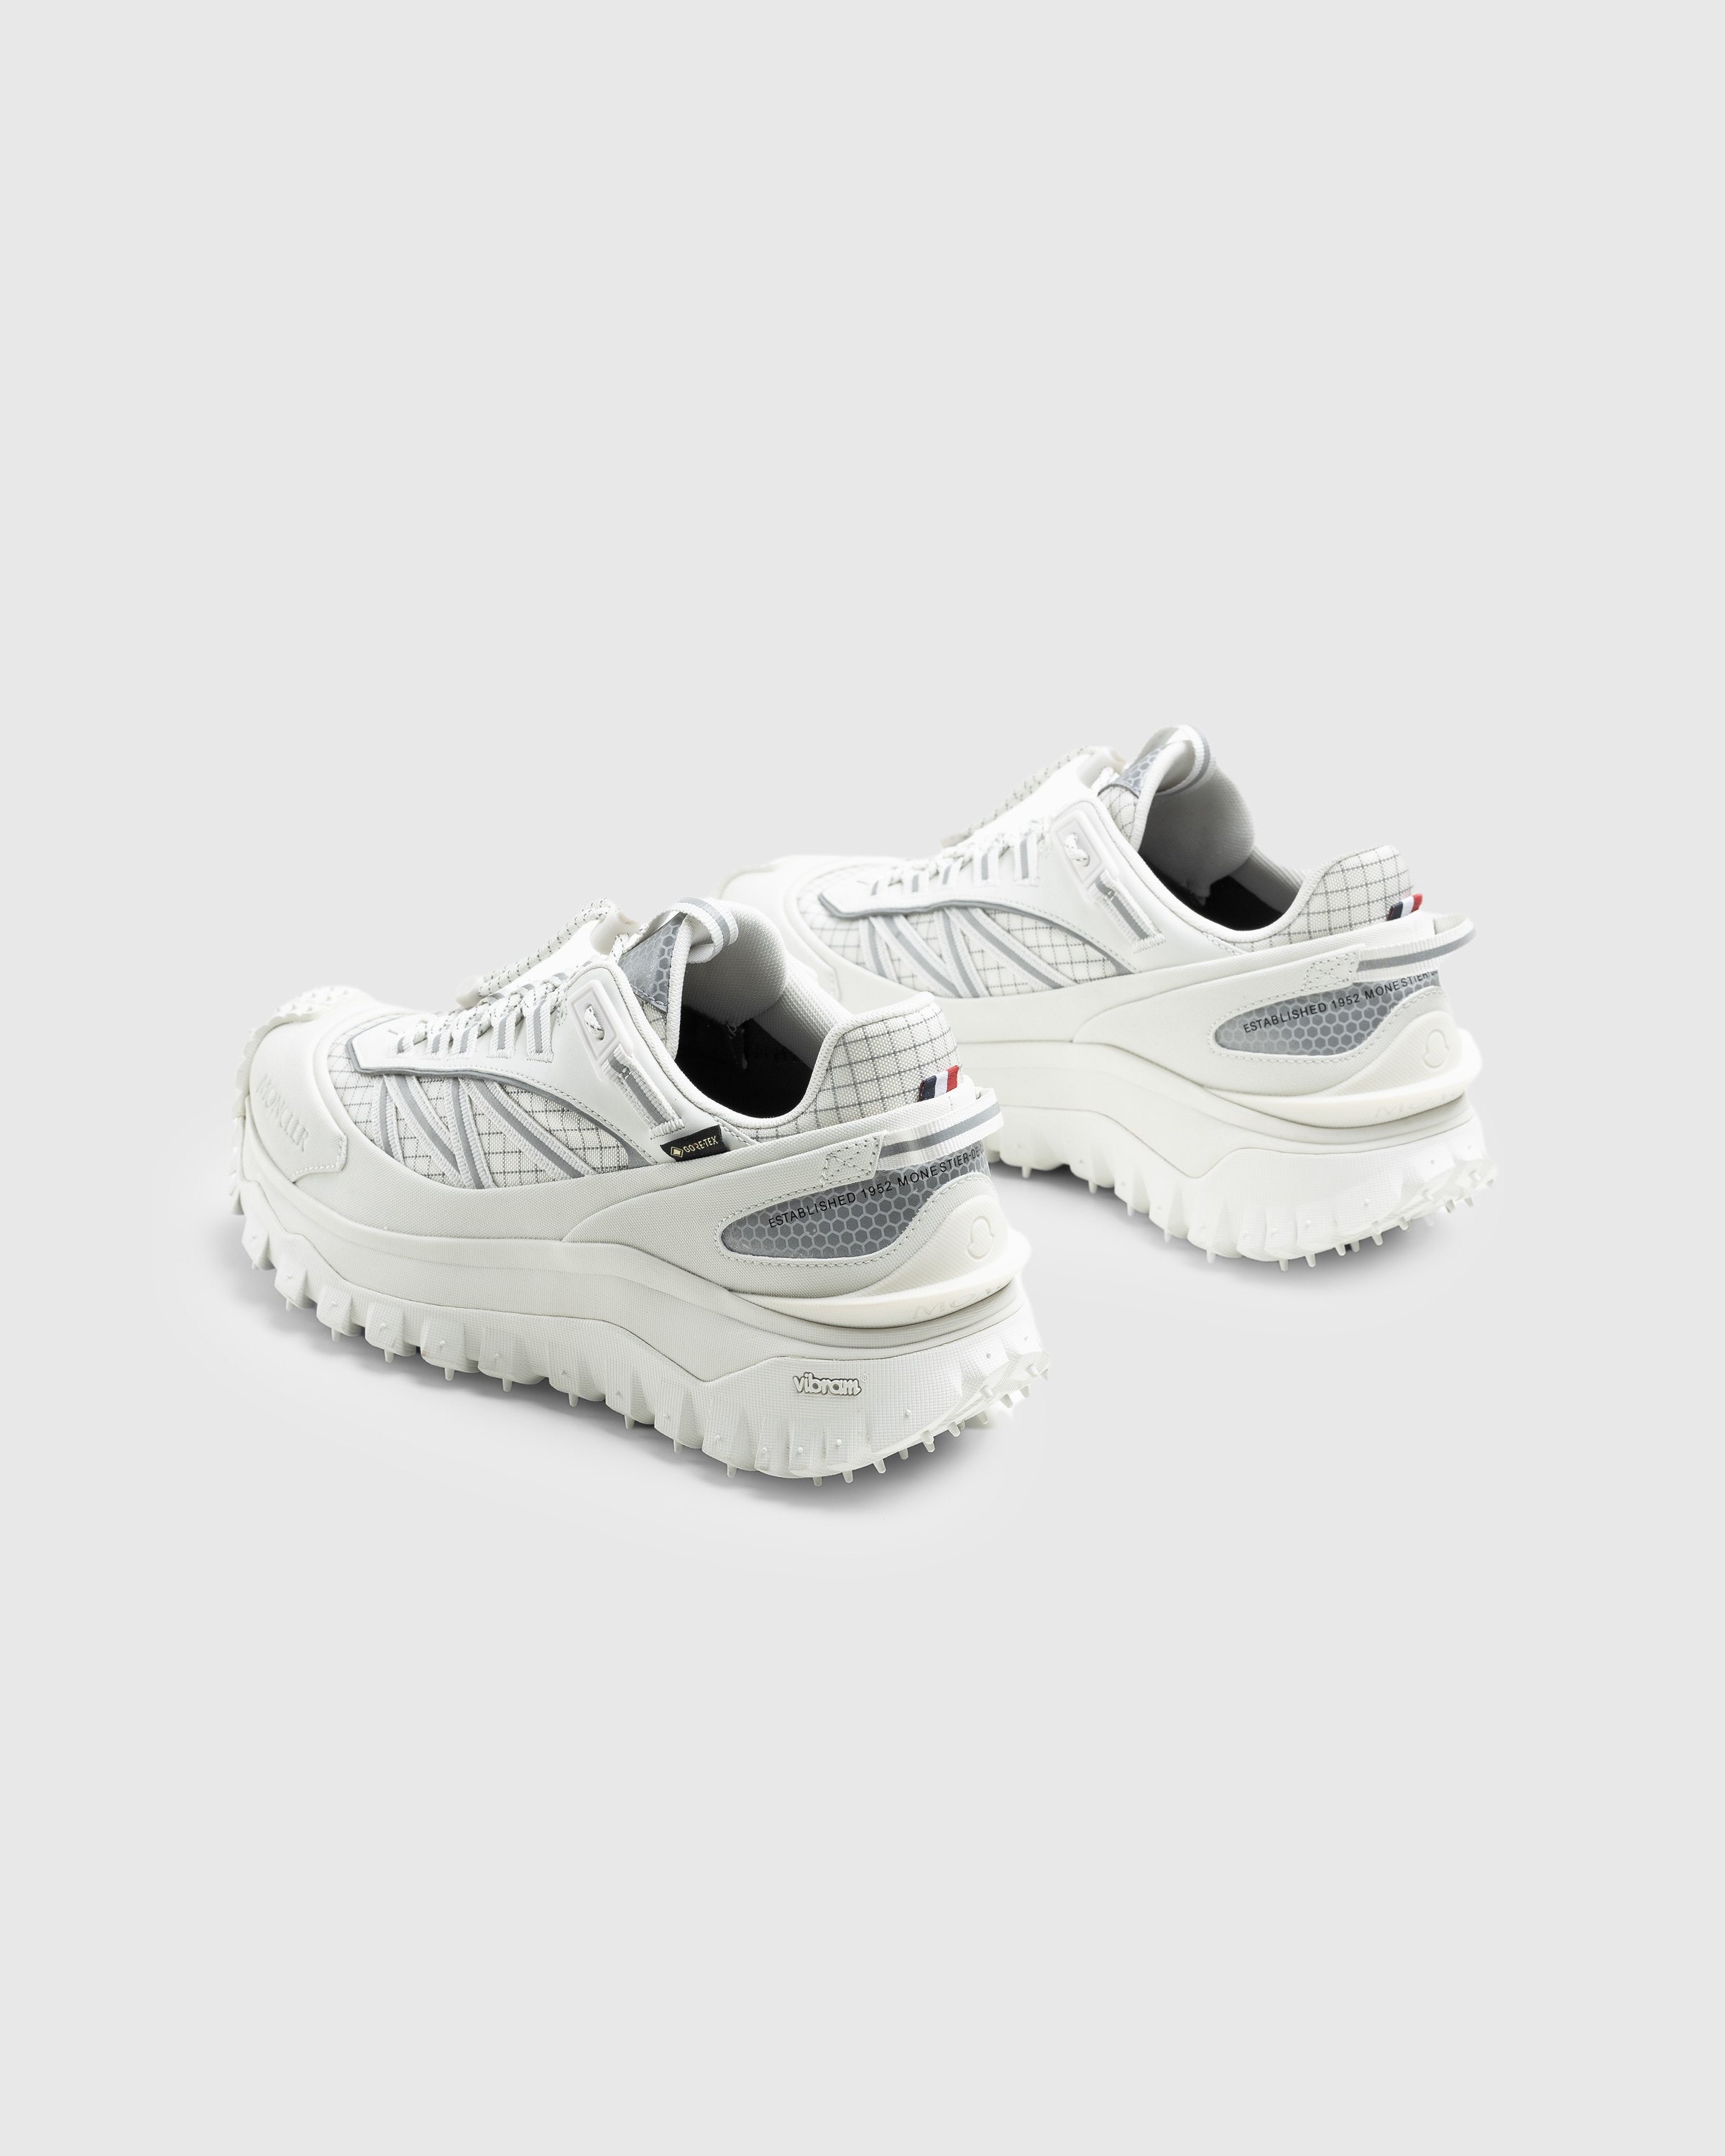 Moncler - Trailgrip Gtx Low Top Sneakers White - Footwear - White - Image 4